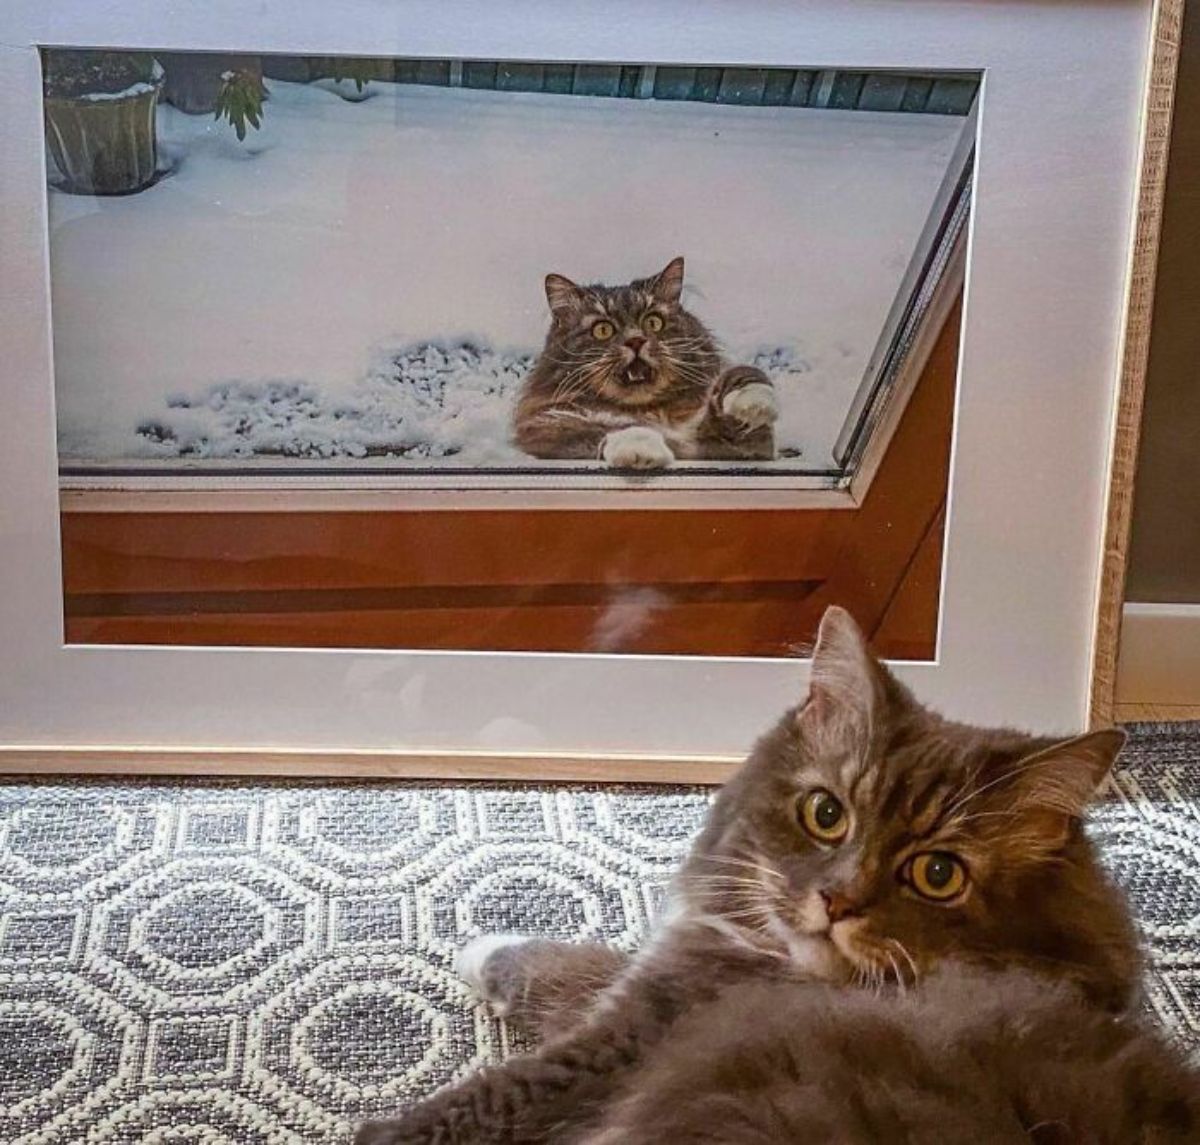 brown and white fluffy cat sitting in front of a framed photo of the same cat surrounded by snow and looking alarmed at a glass door